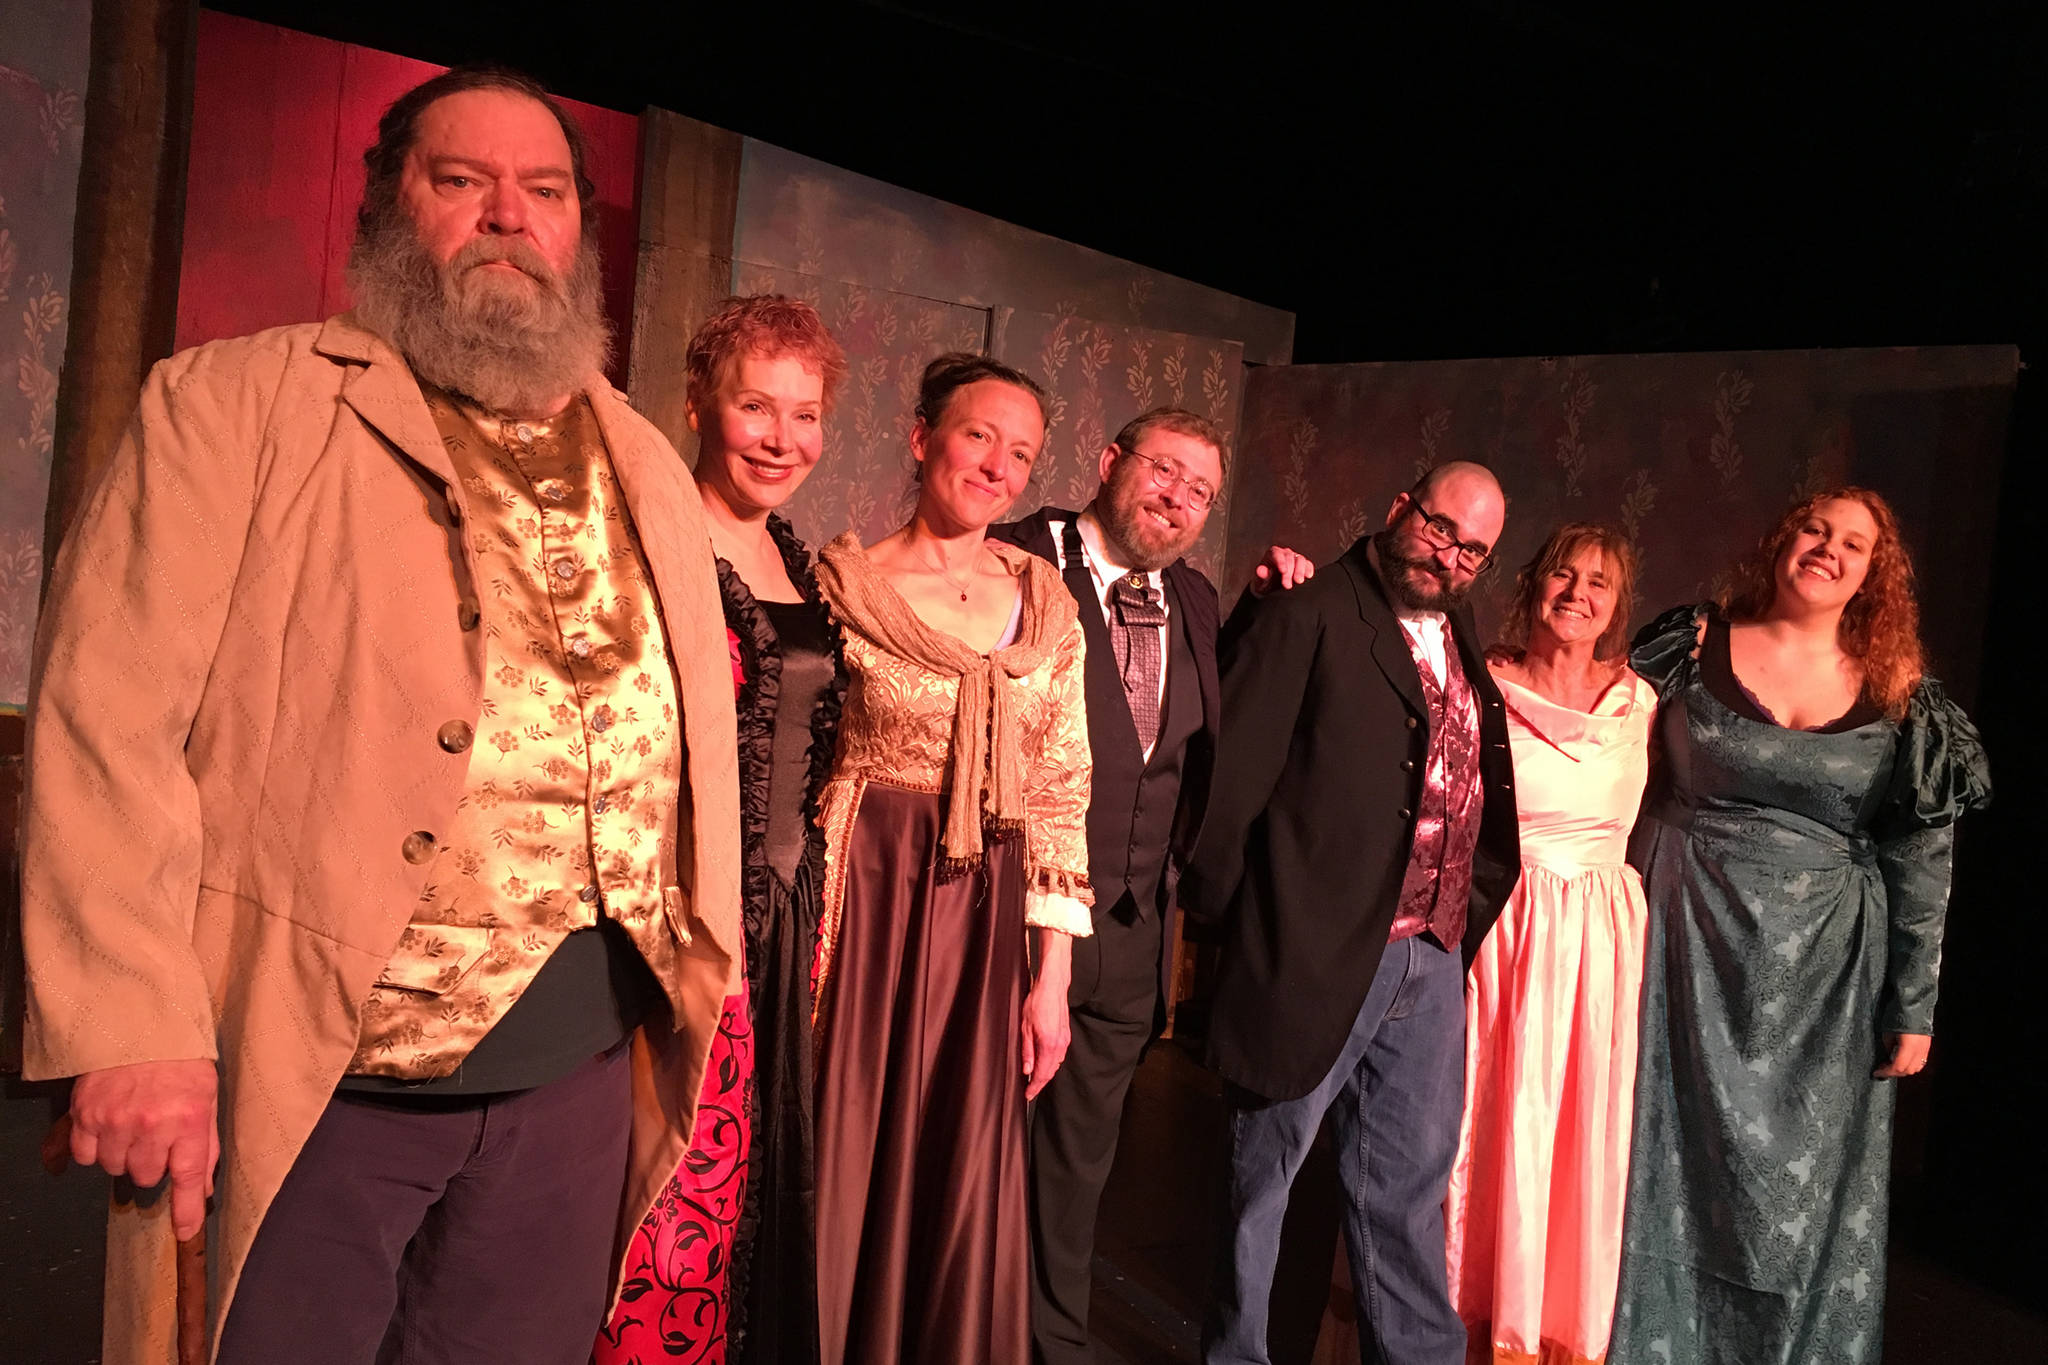 The cast of “An Ideal Husband” pose for a photo during a rehearsal on May 19, 2019, at Pier One Theatre in Homer, Alaska. From left to right are Peter Norton, Judith Kramer, Adele Person, Mike Tupper, Aaron Walbrecher, Mary Fries and Ali Rambo. (Photo provided)